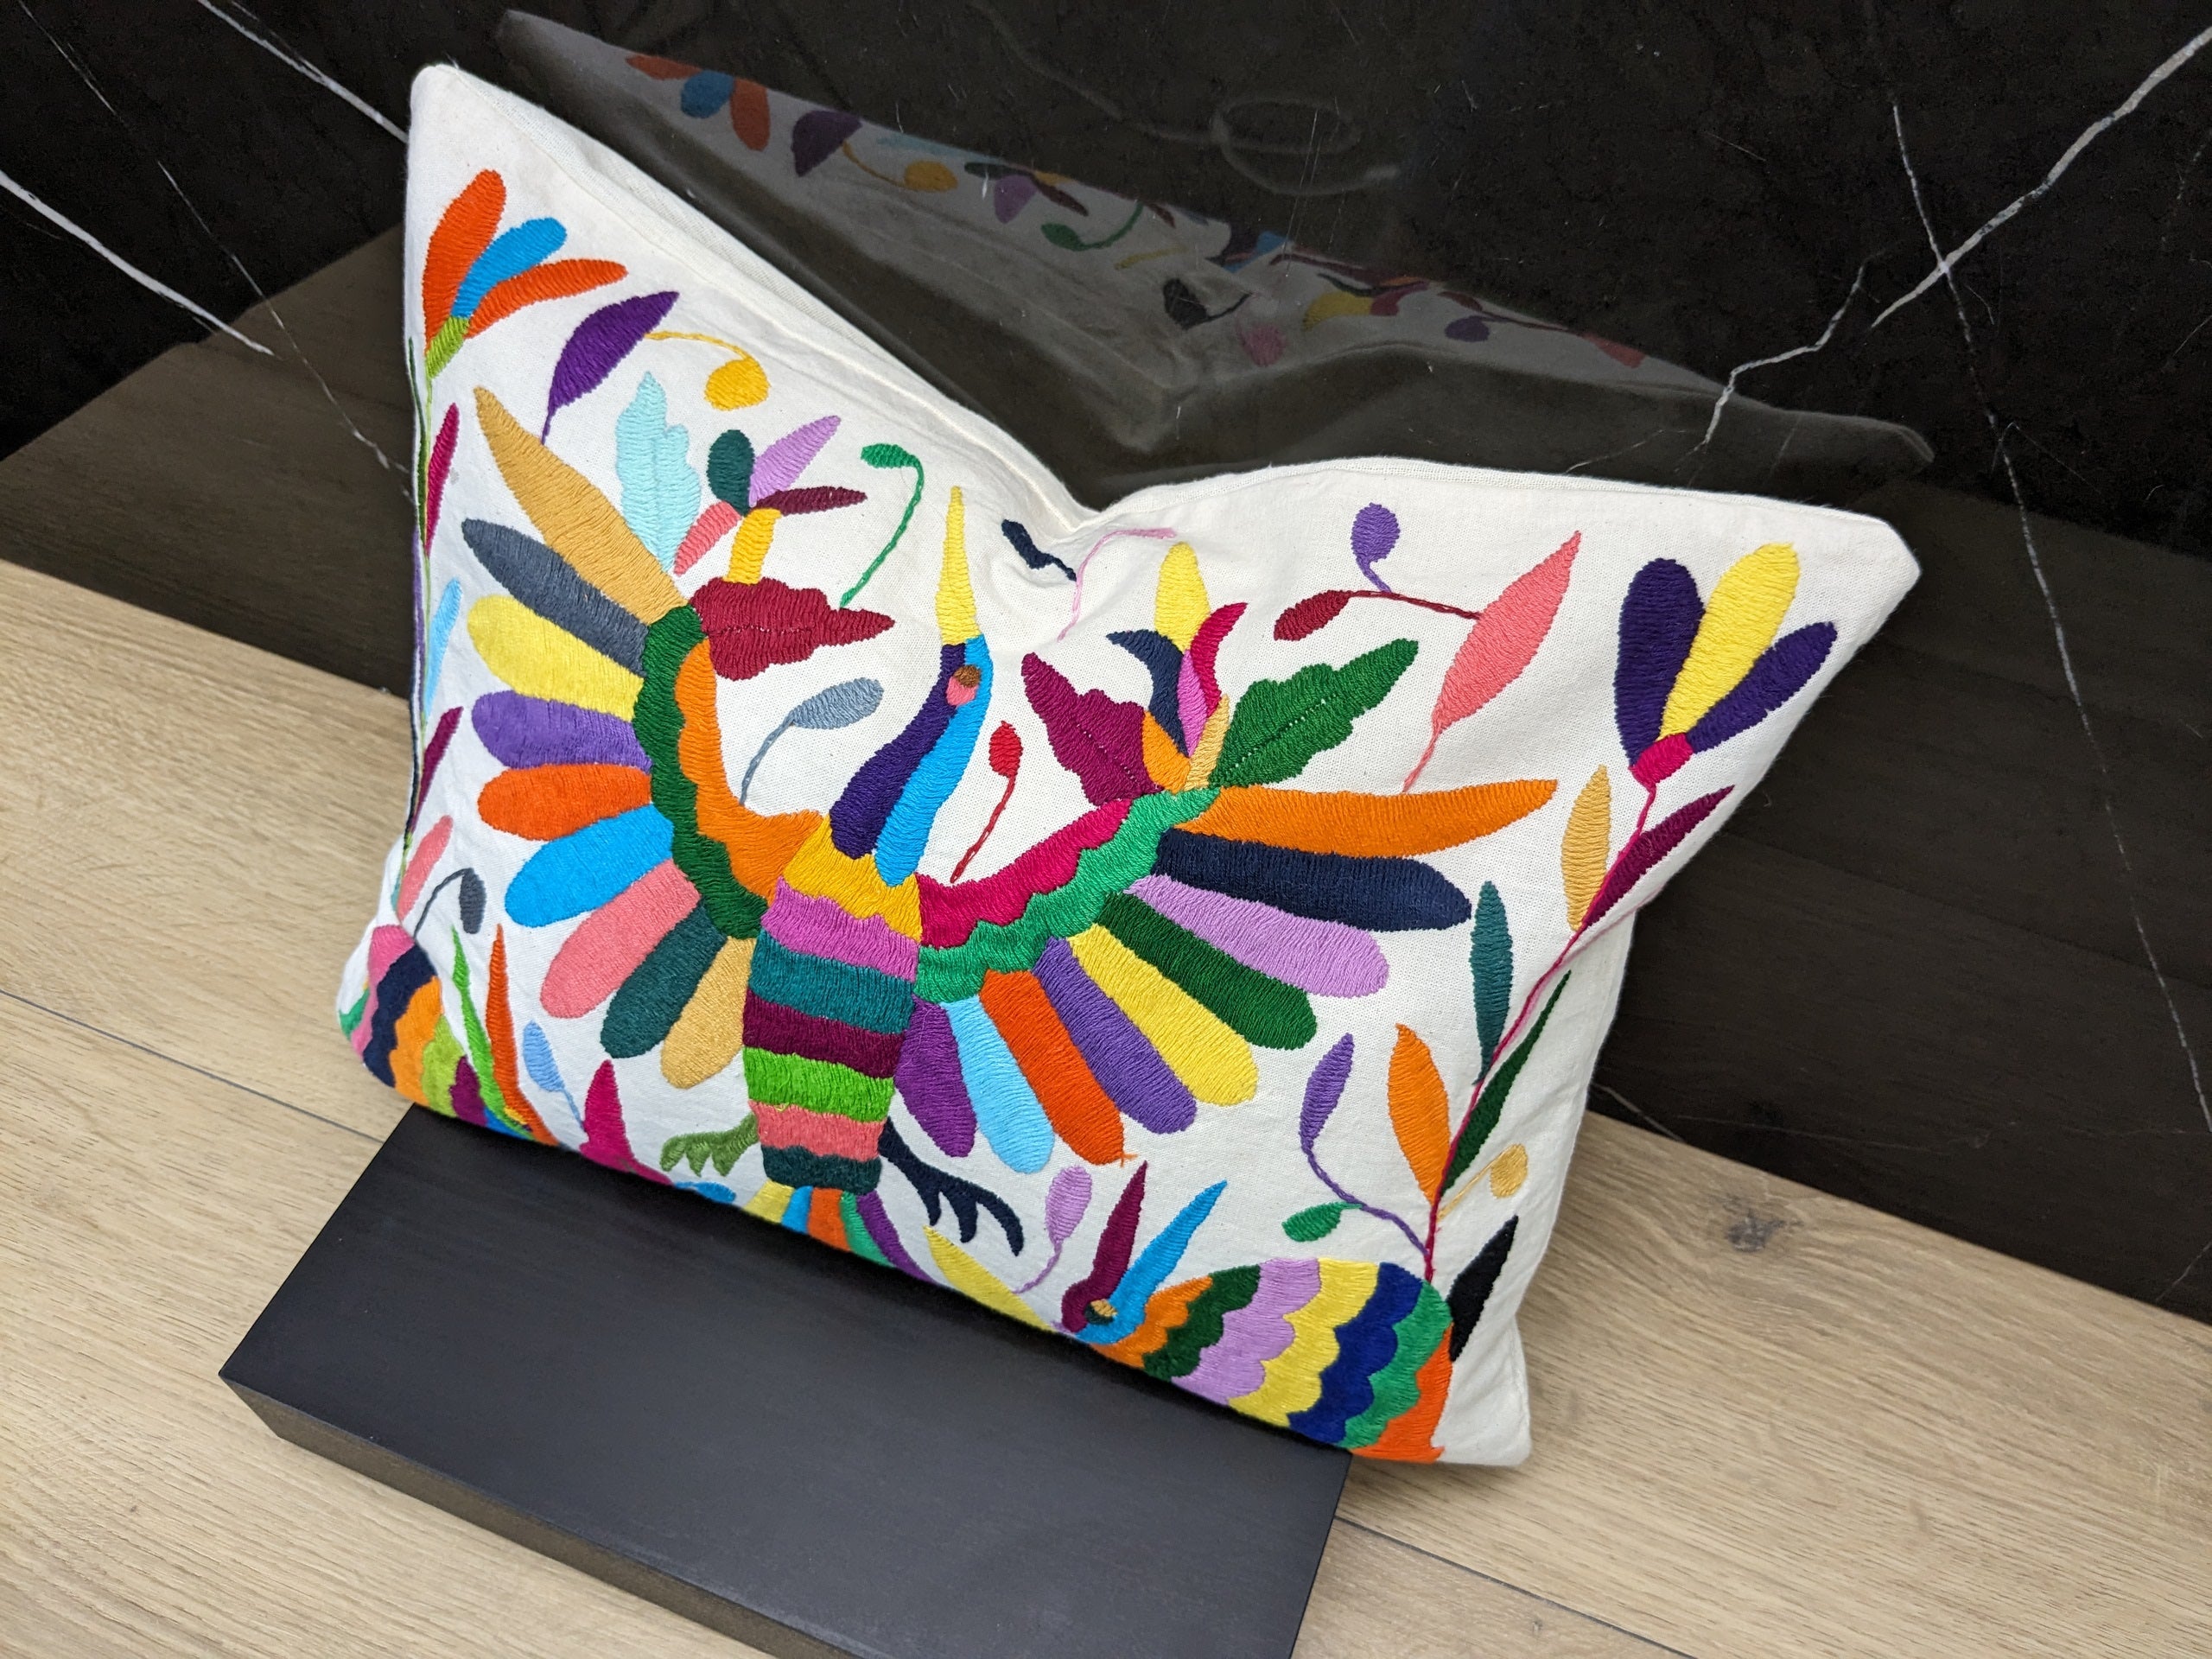 Rectangle Otomi Tenango Pillow Cover with Hand Embroidered Birds, Flowers, and Animals in Vibrant Colors. Handmade in Mexico. We package and ship from the USA. Buy now at www.felipeandgrace.com.